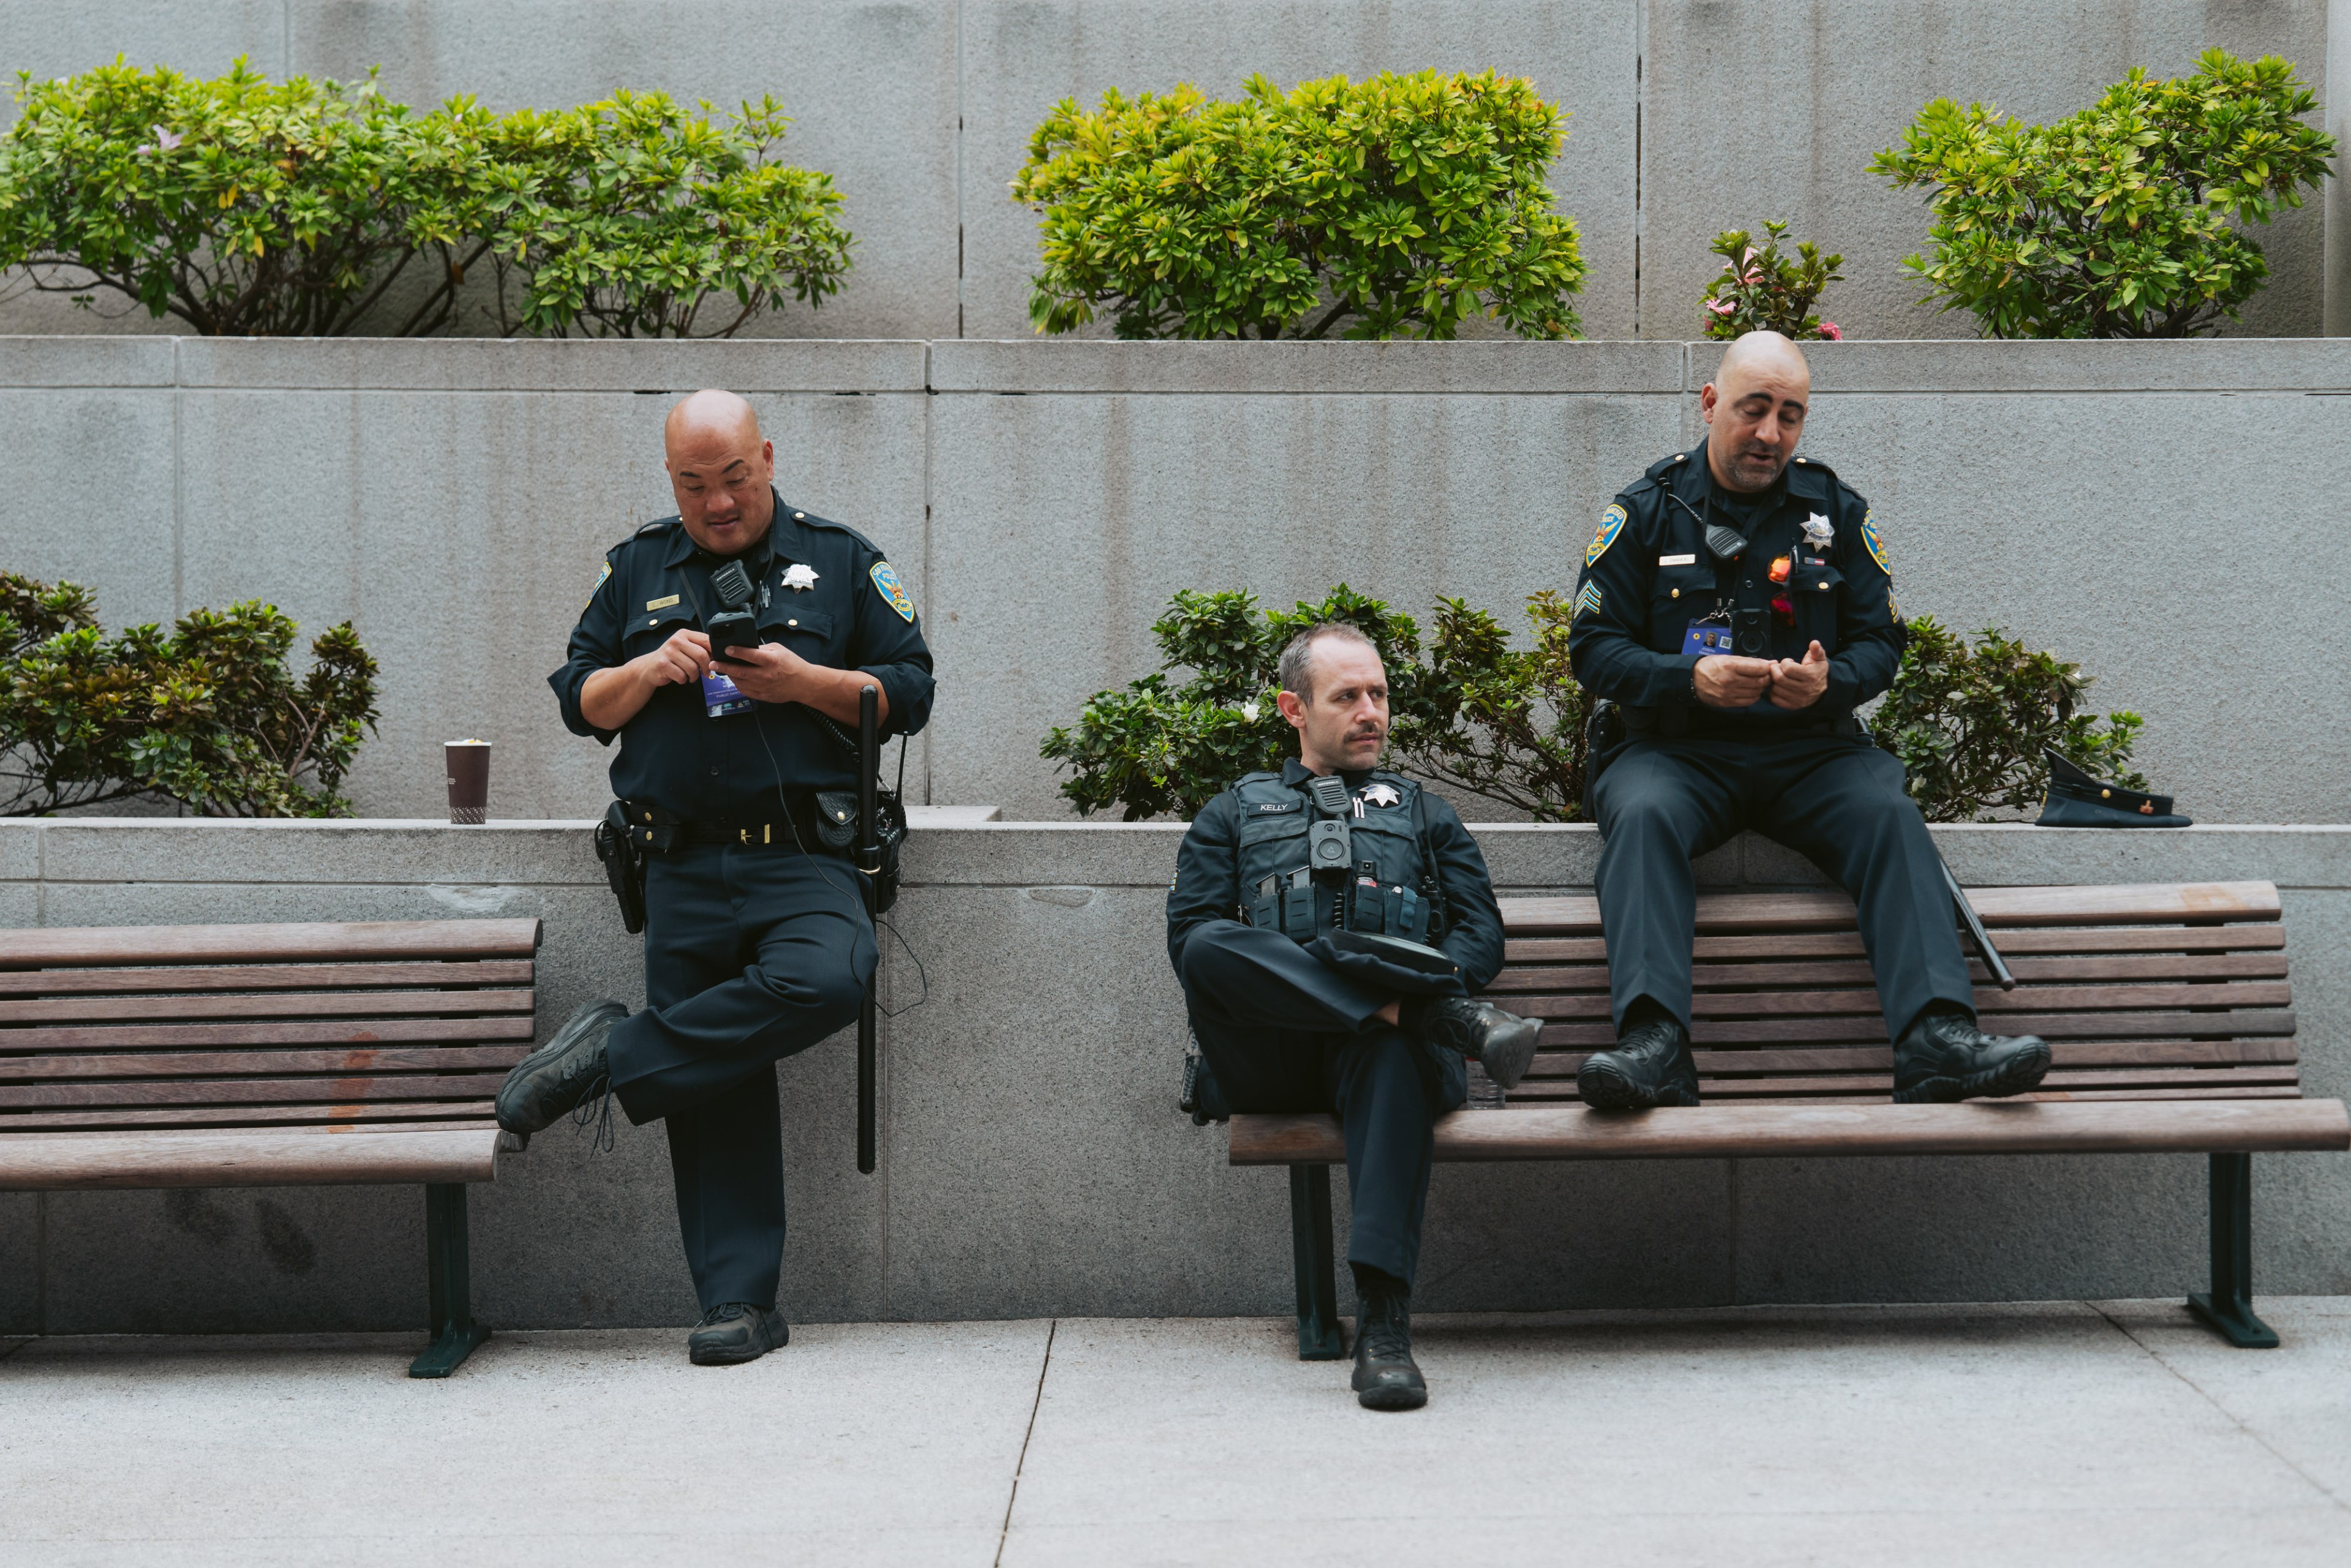 Three police officers are sitting on a bench; two are on their phones, and one looks pensive. There's greenery behind them on a gray wall.